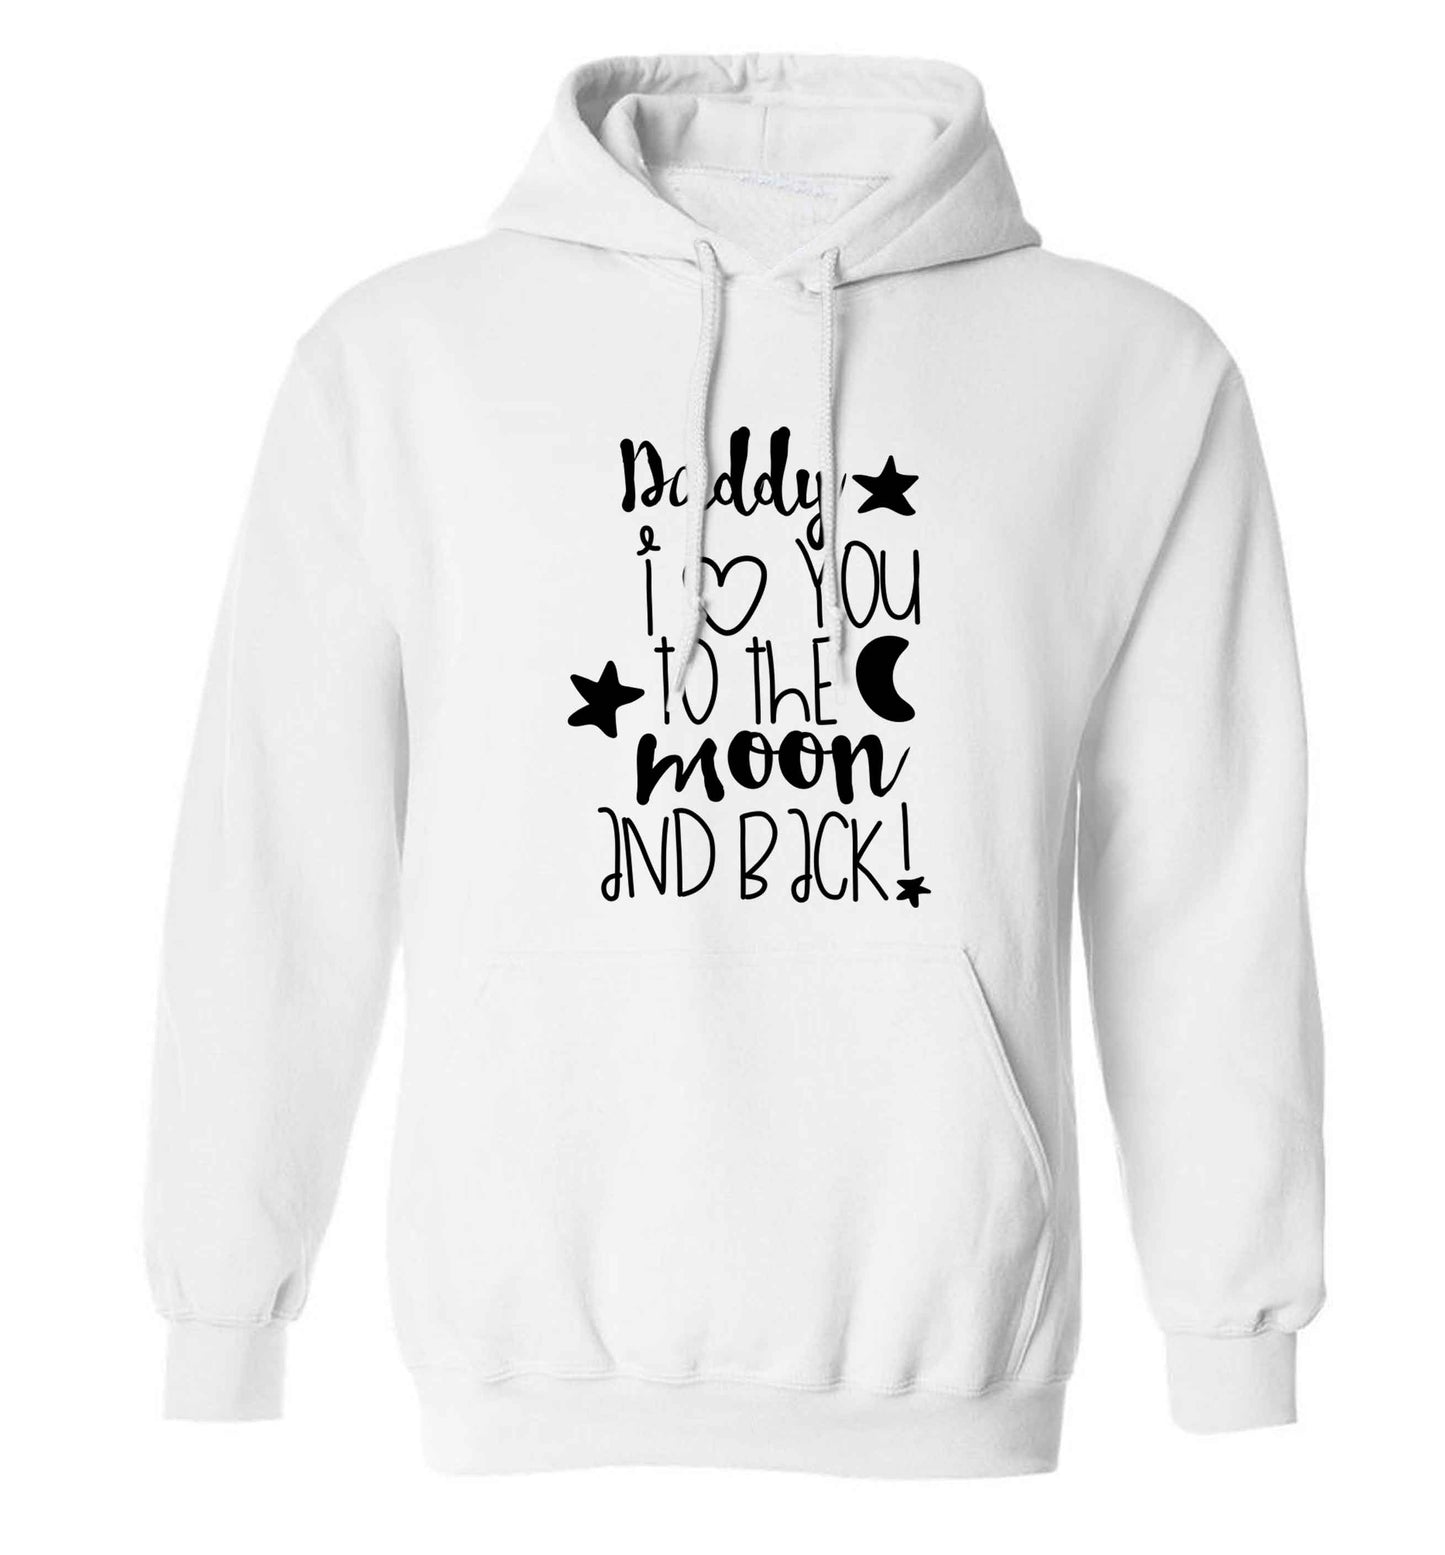 Daddy I love you to the moon and back adults unisex white hoodie 2XL